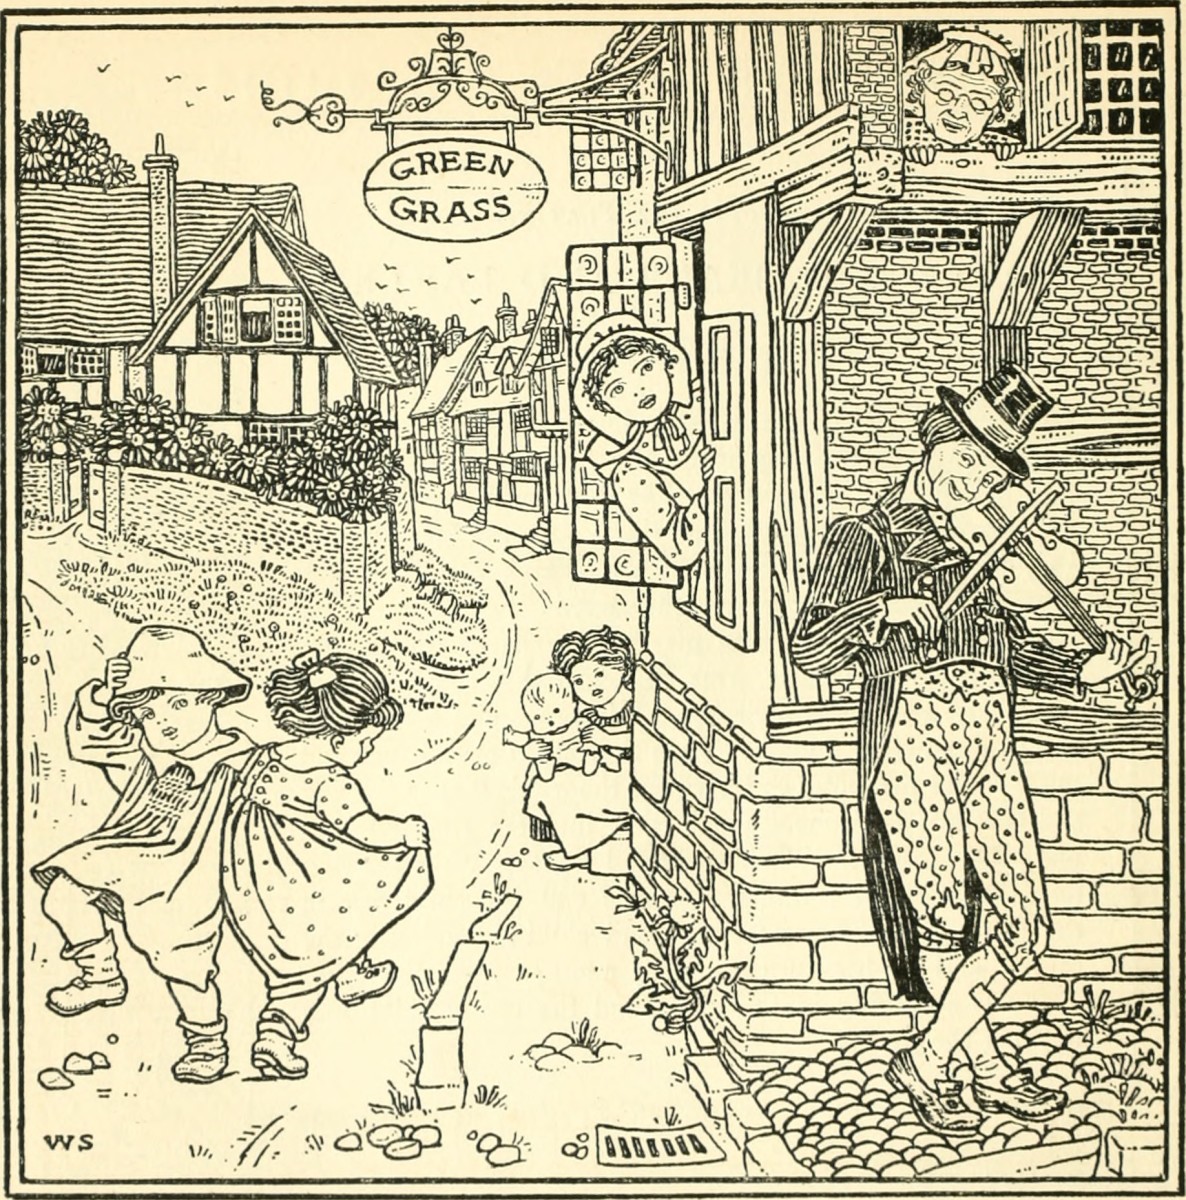 Children's Singing Games, book cover from 1900